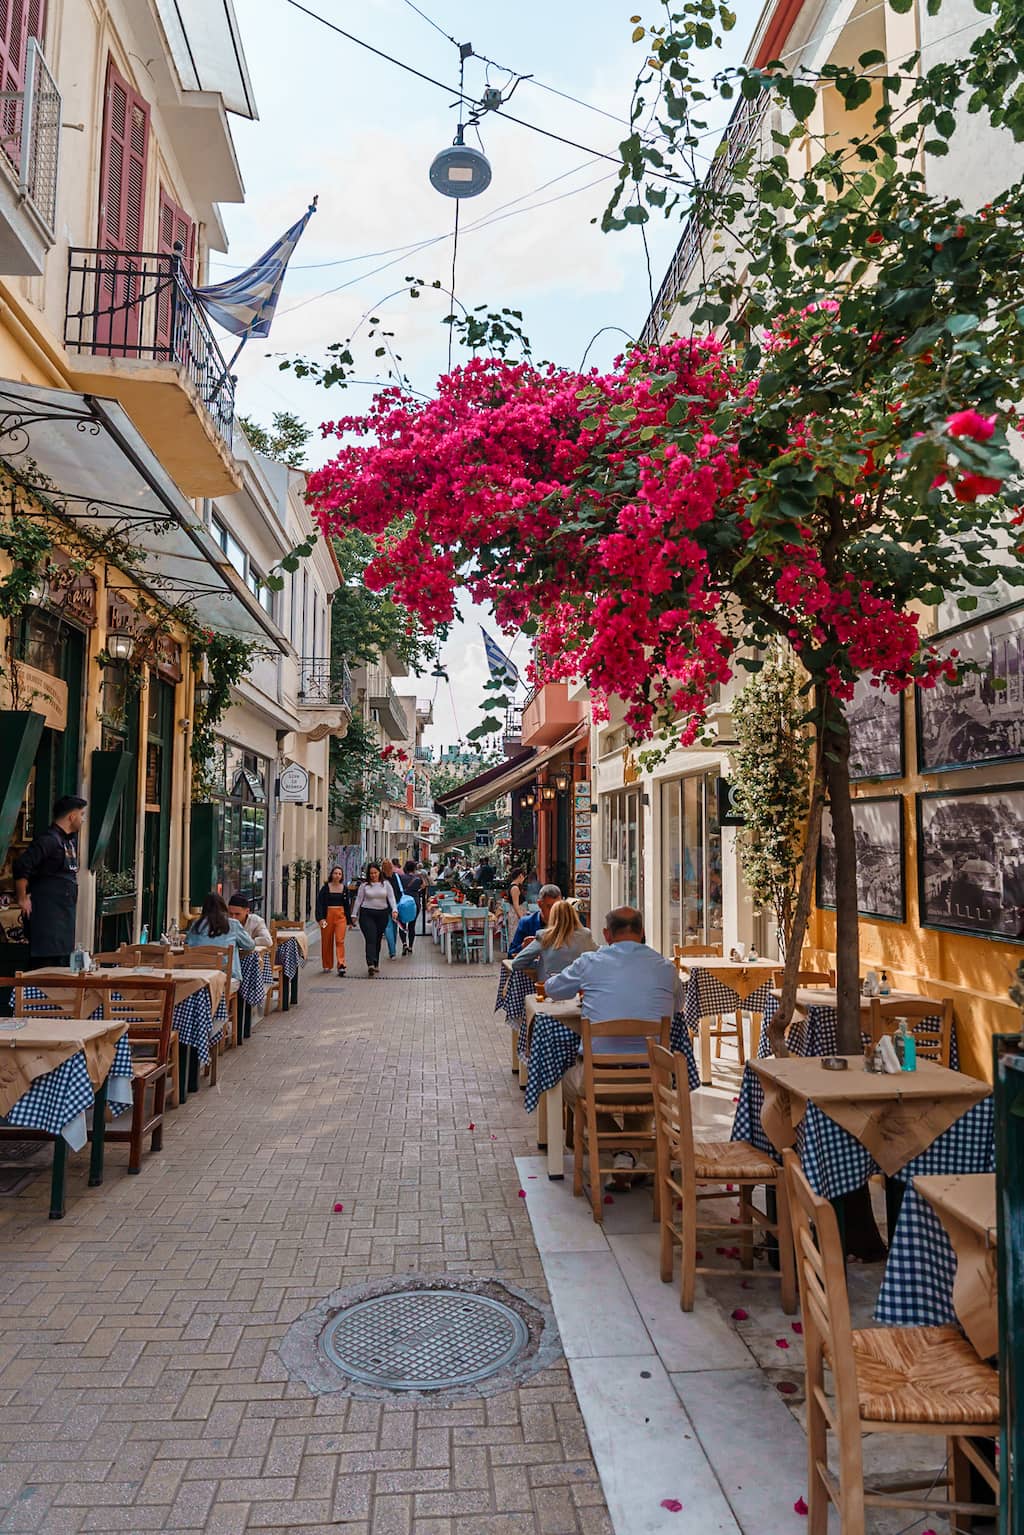 The streets of Psyri Athens